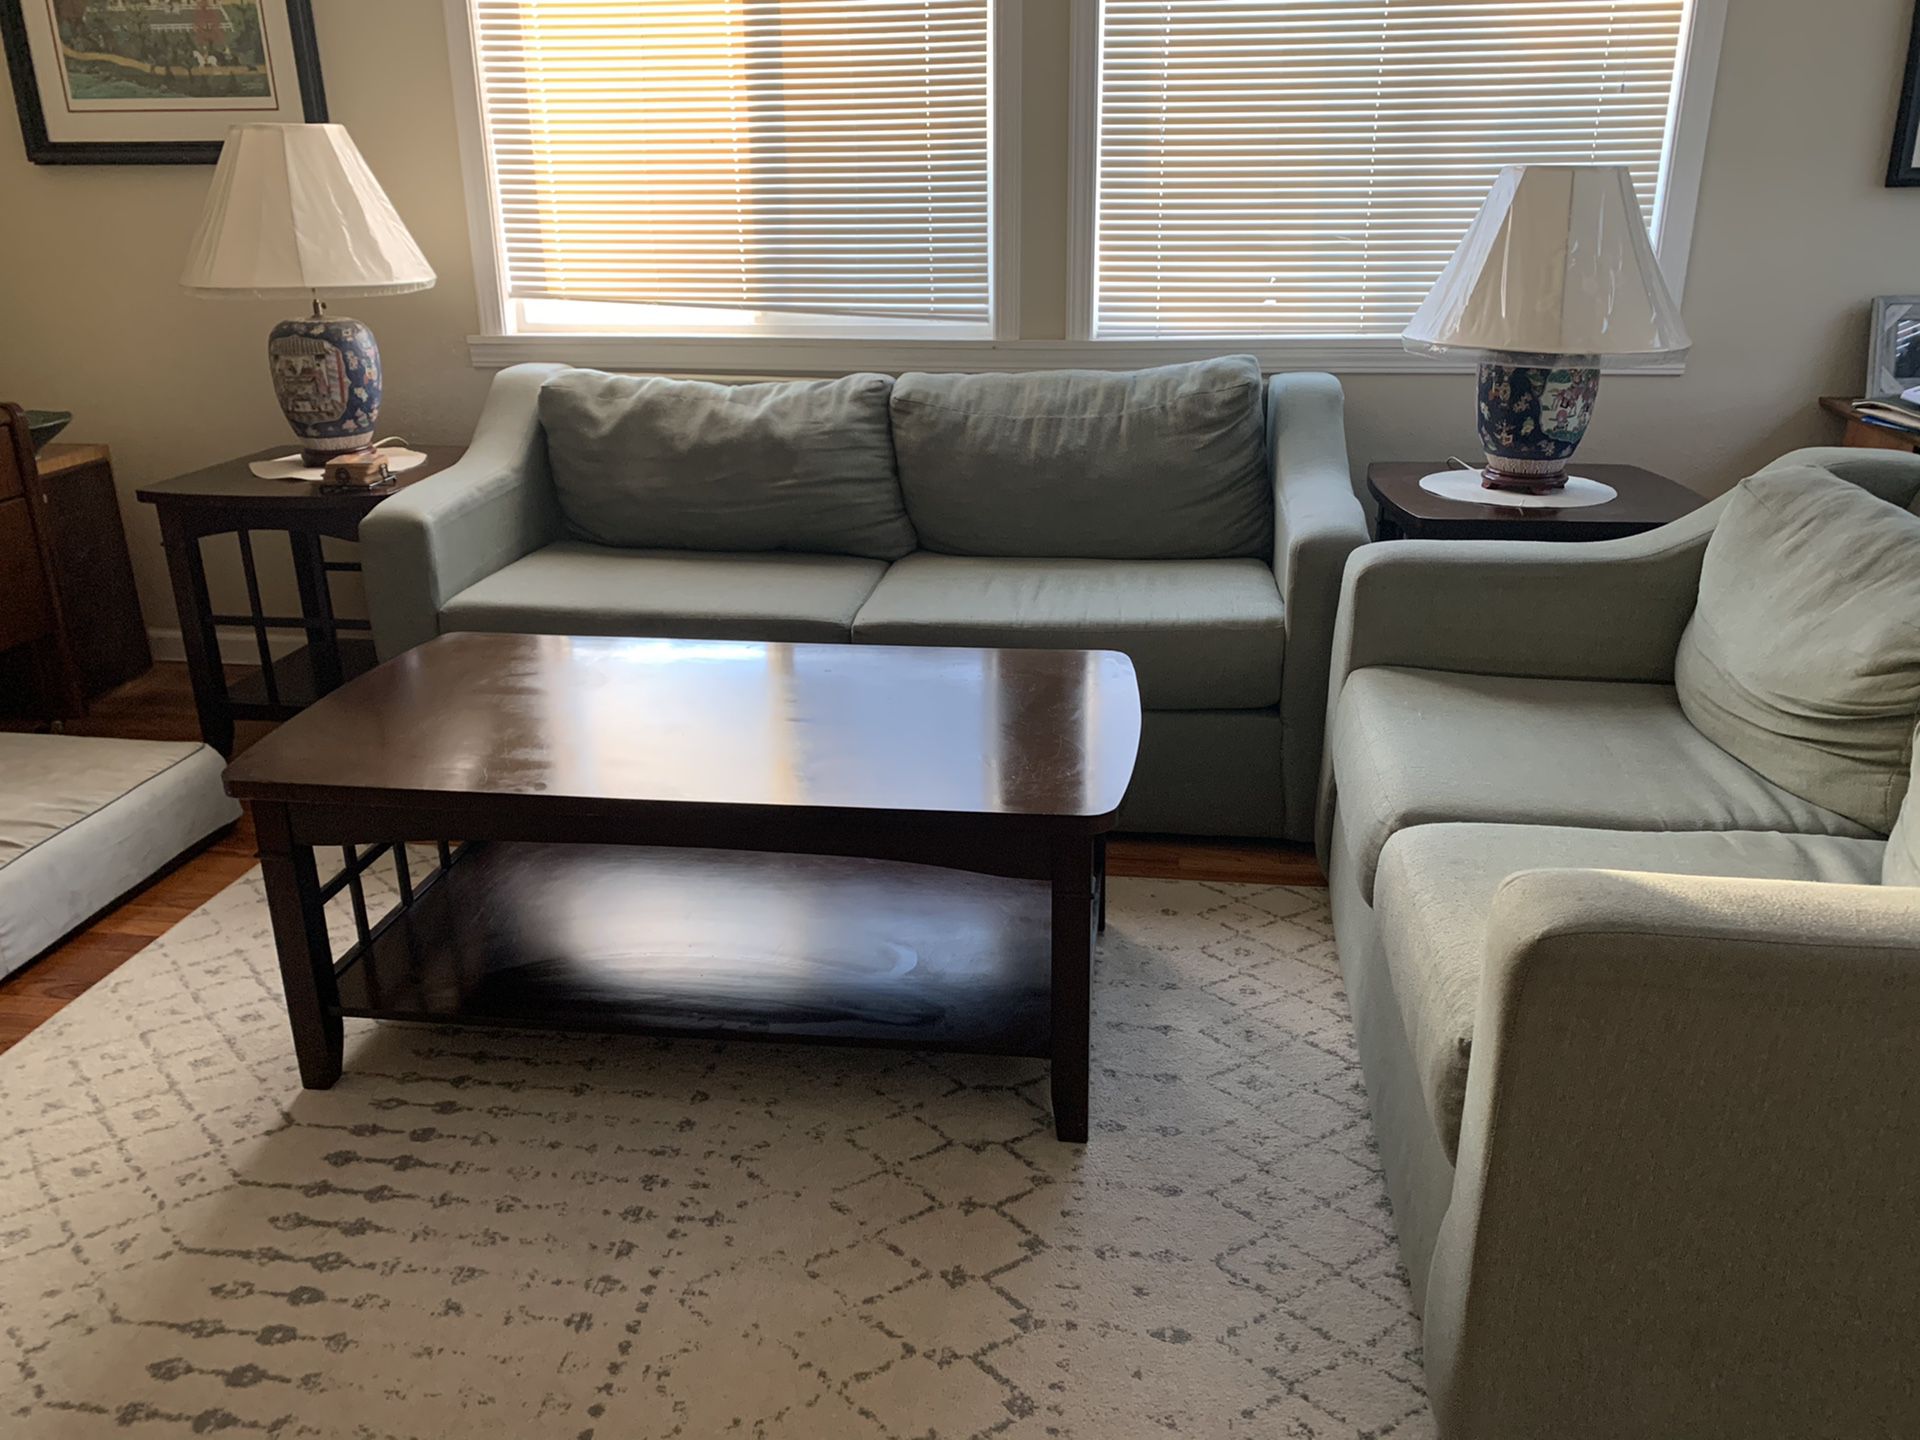 Living room set - Couches, coffee/end tables, lamps